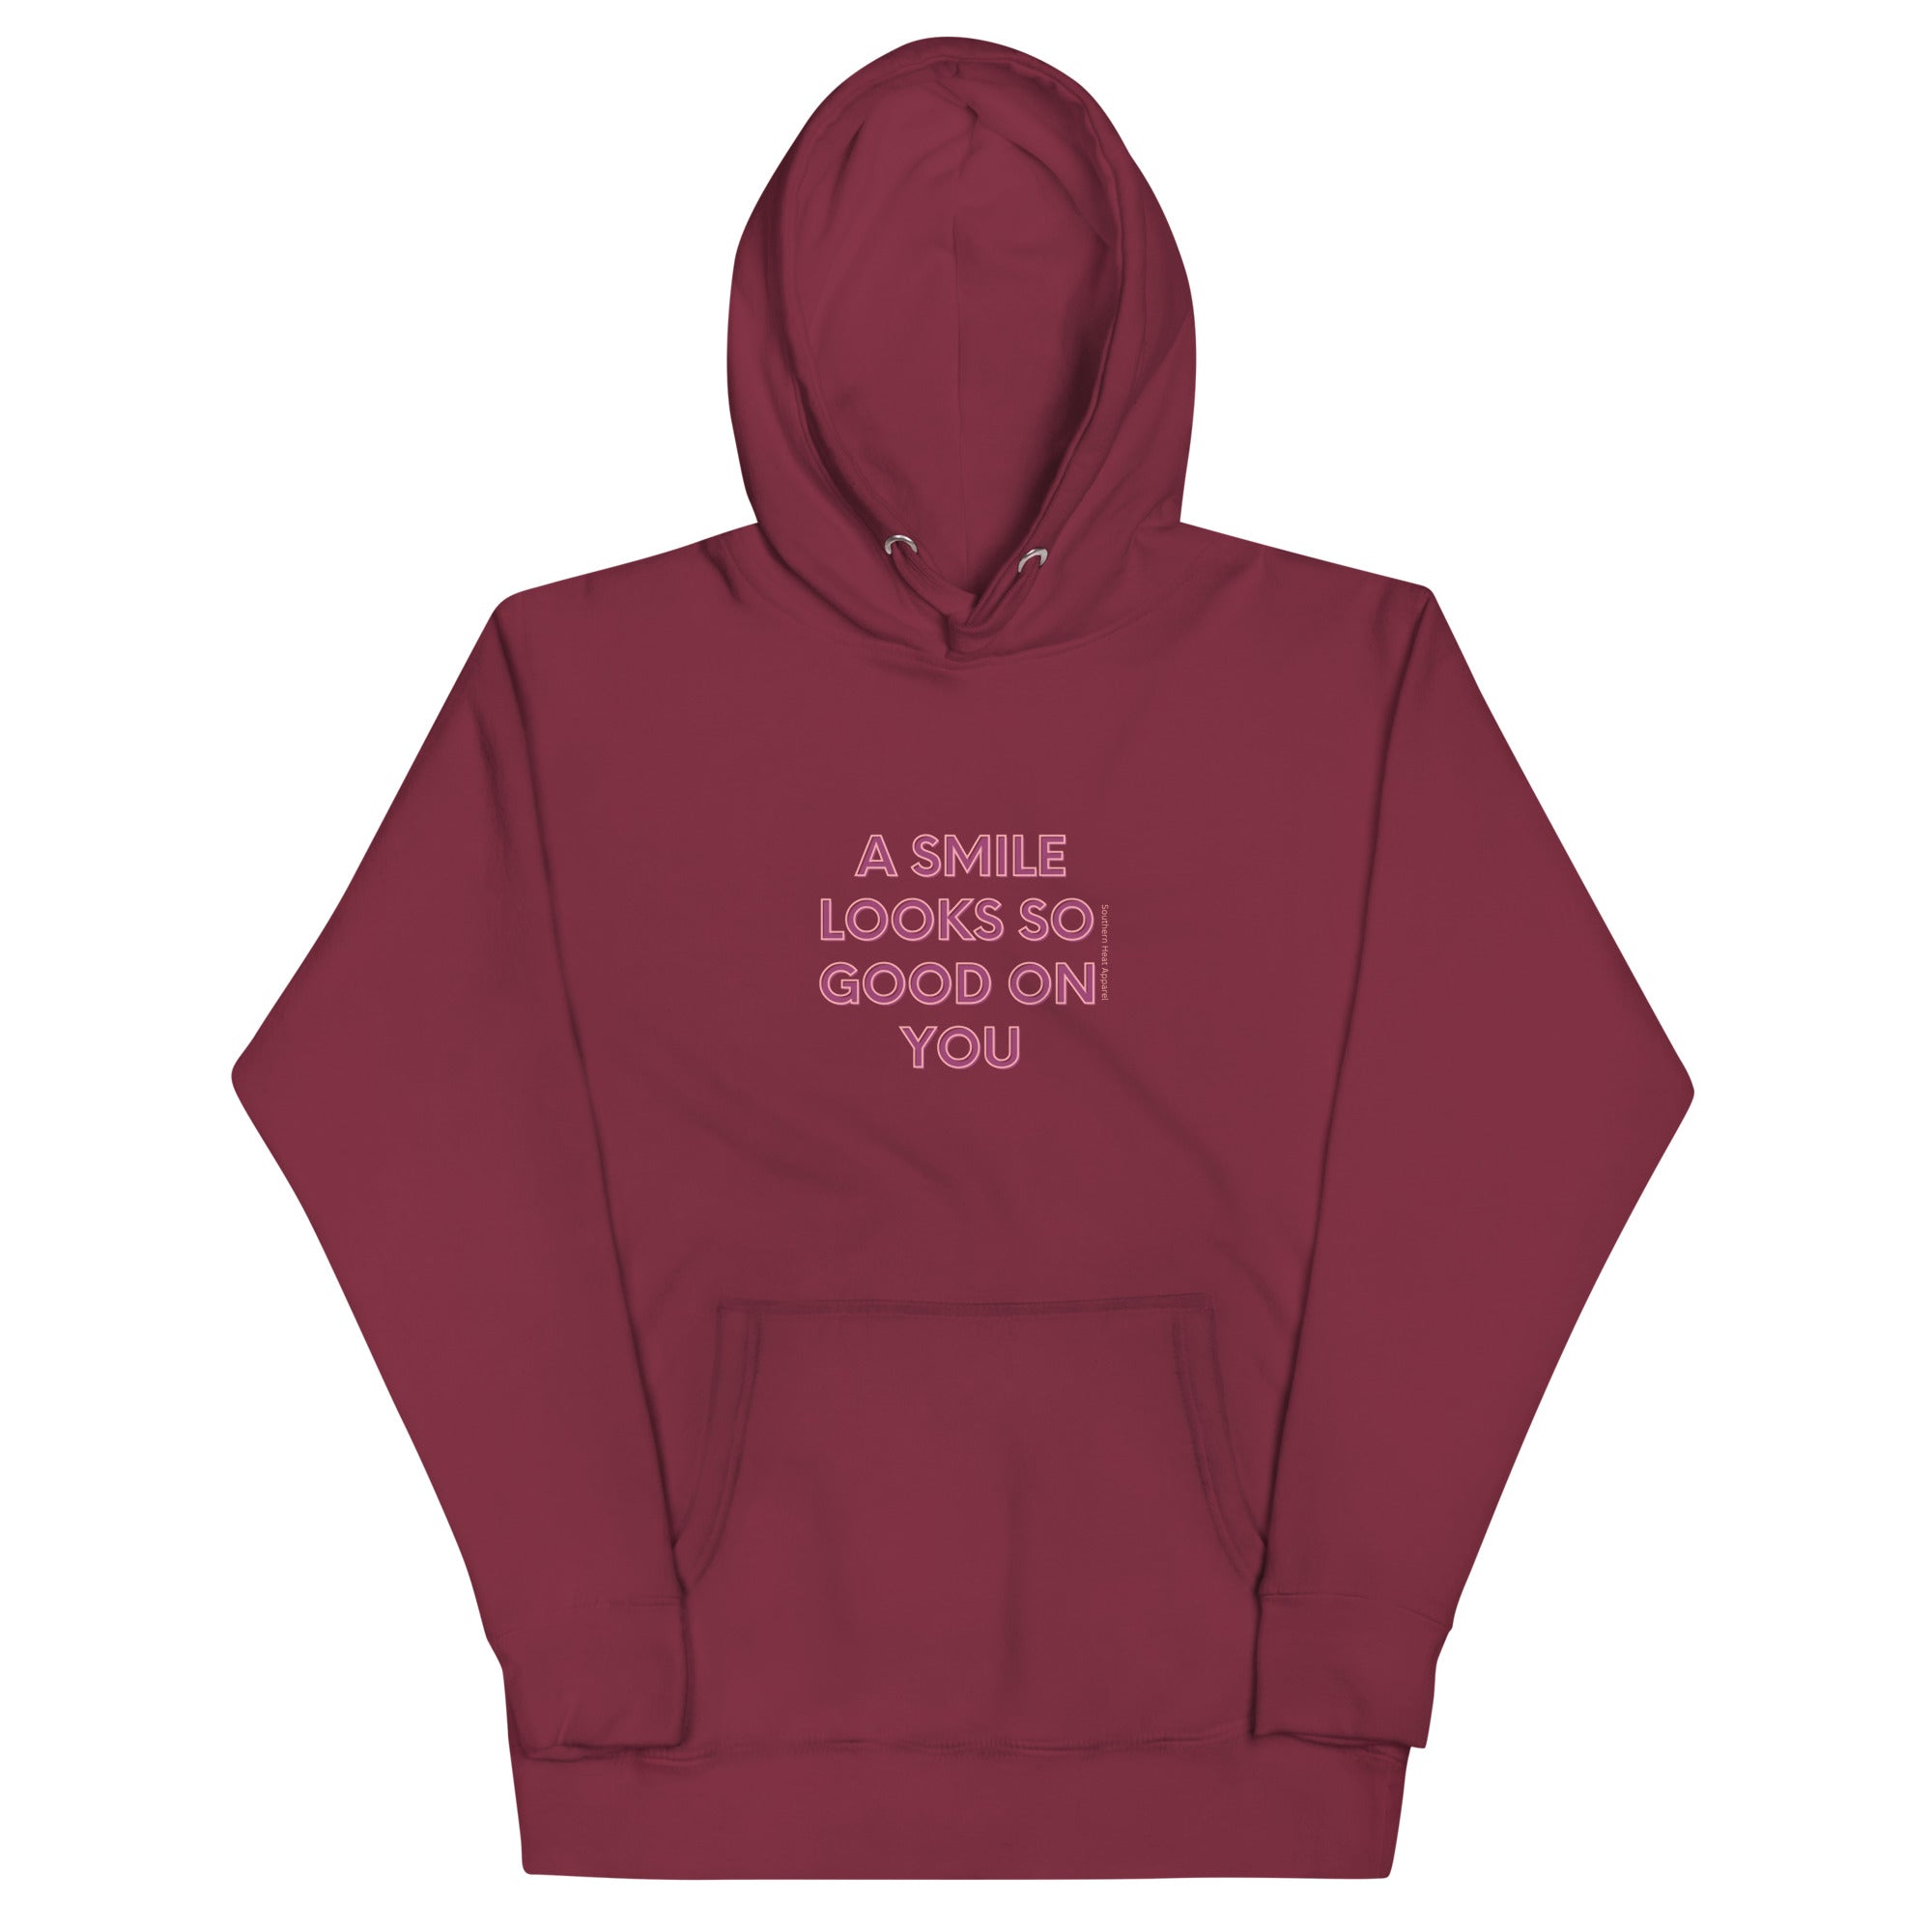 A smile looks so good on you-Unisex Hoodie